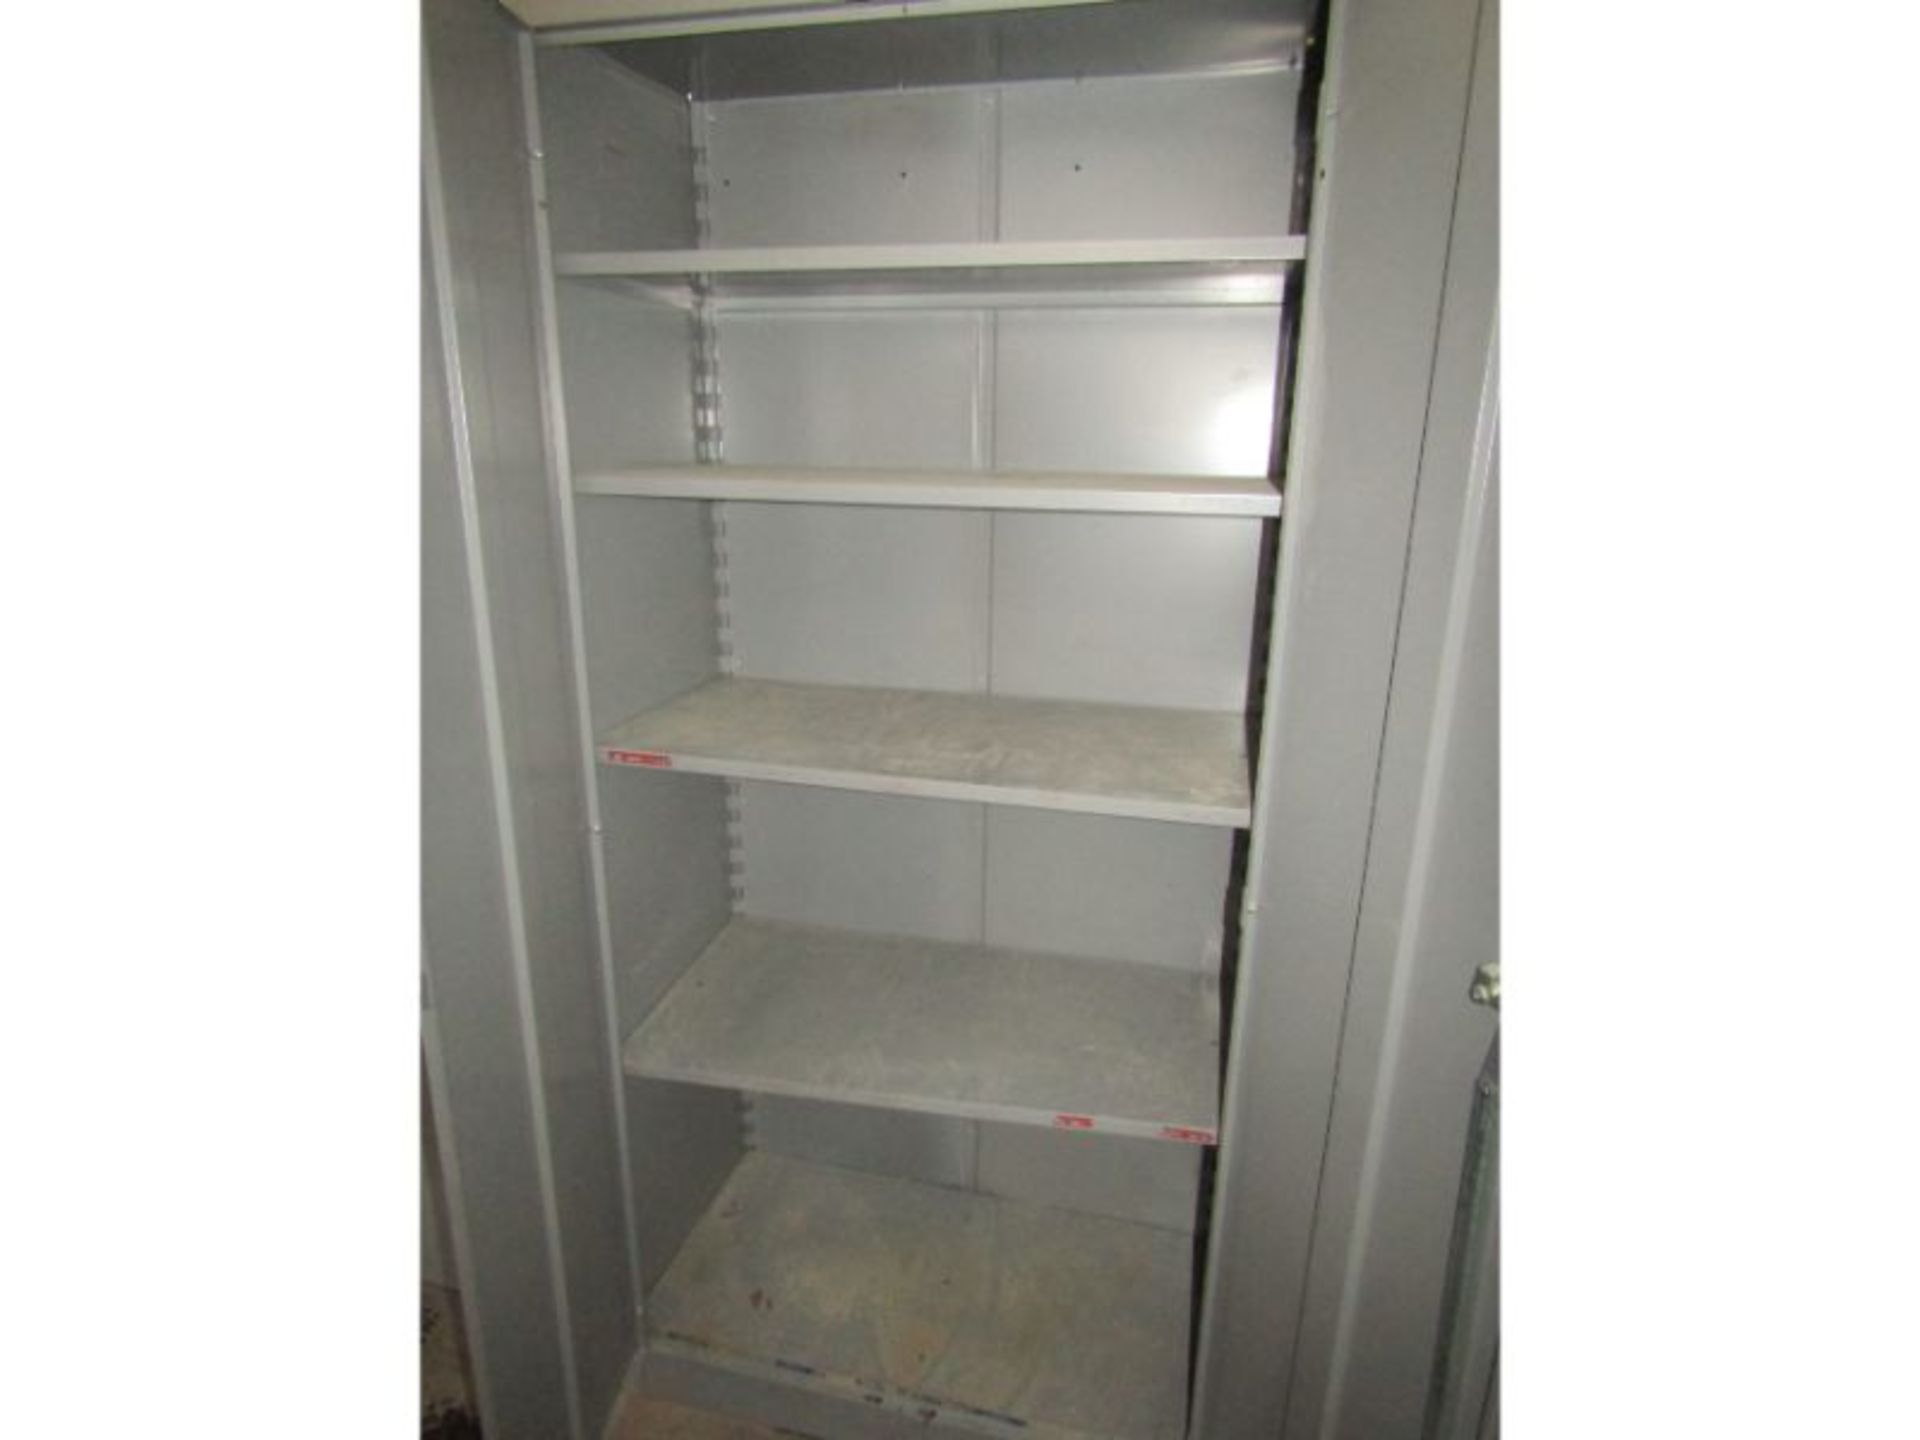 78”x36”x18” Cabinet - Image 2 of 3